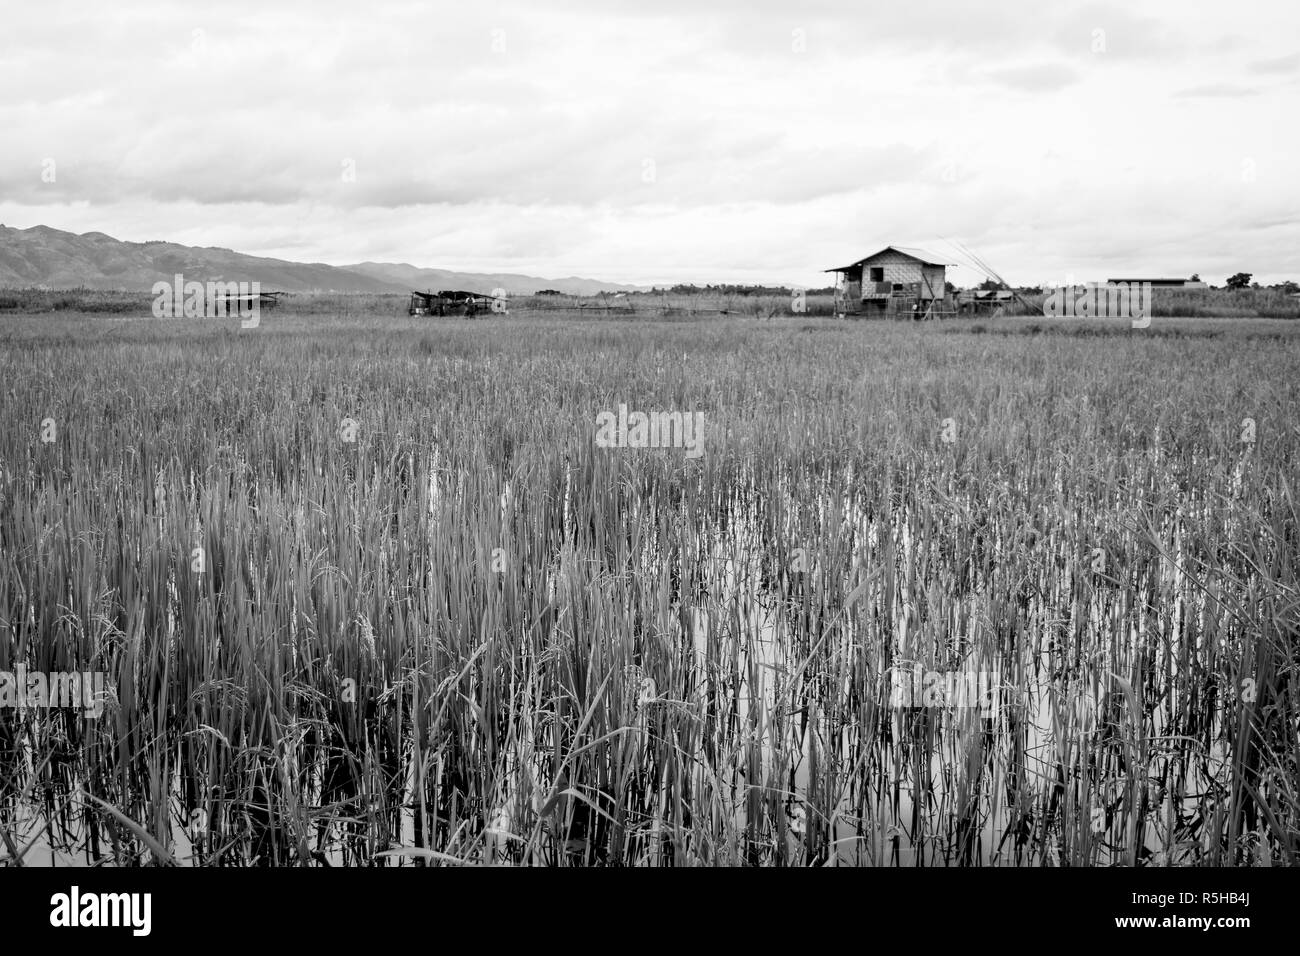 agriculture near Inle Lake, Shan, Myanmar, Burma. A rice plantation field, flooded with water with a small hut. Rice local farming, black and white Stock Photo